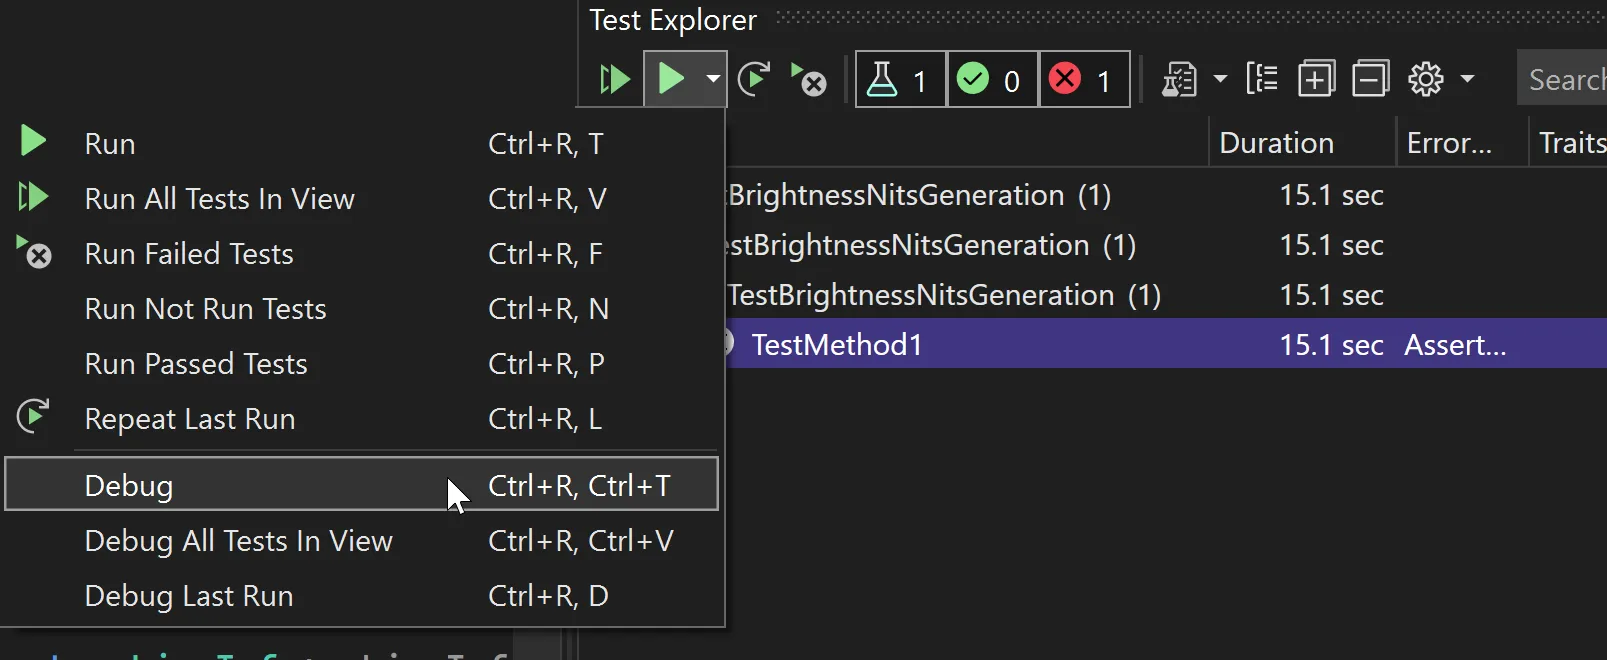 from test explorer, select Debug, instead of Run